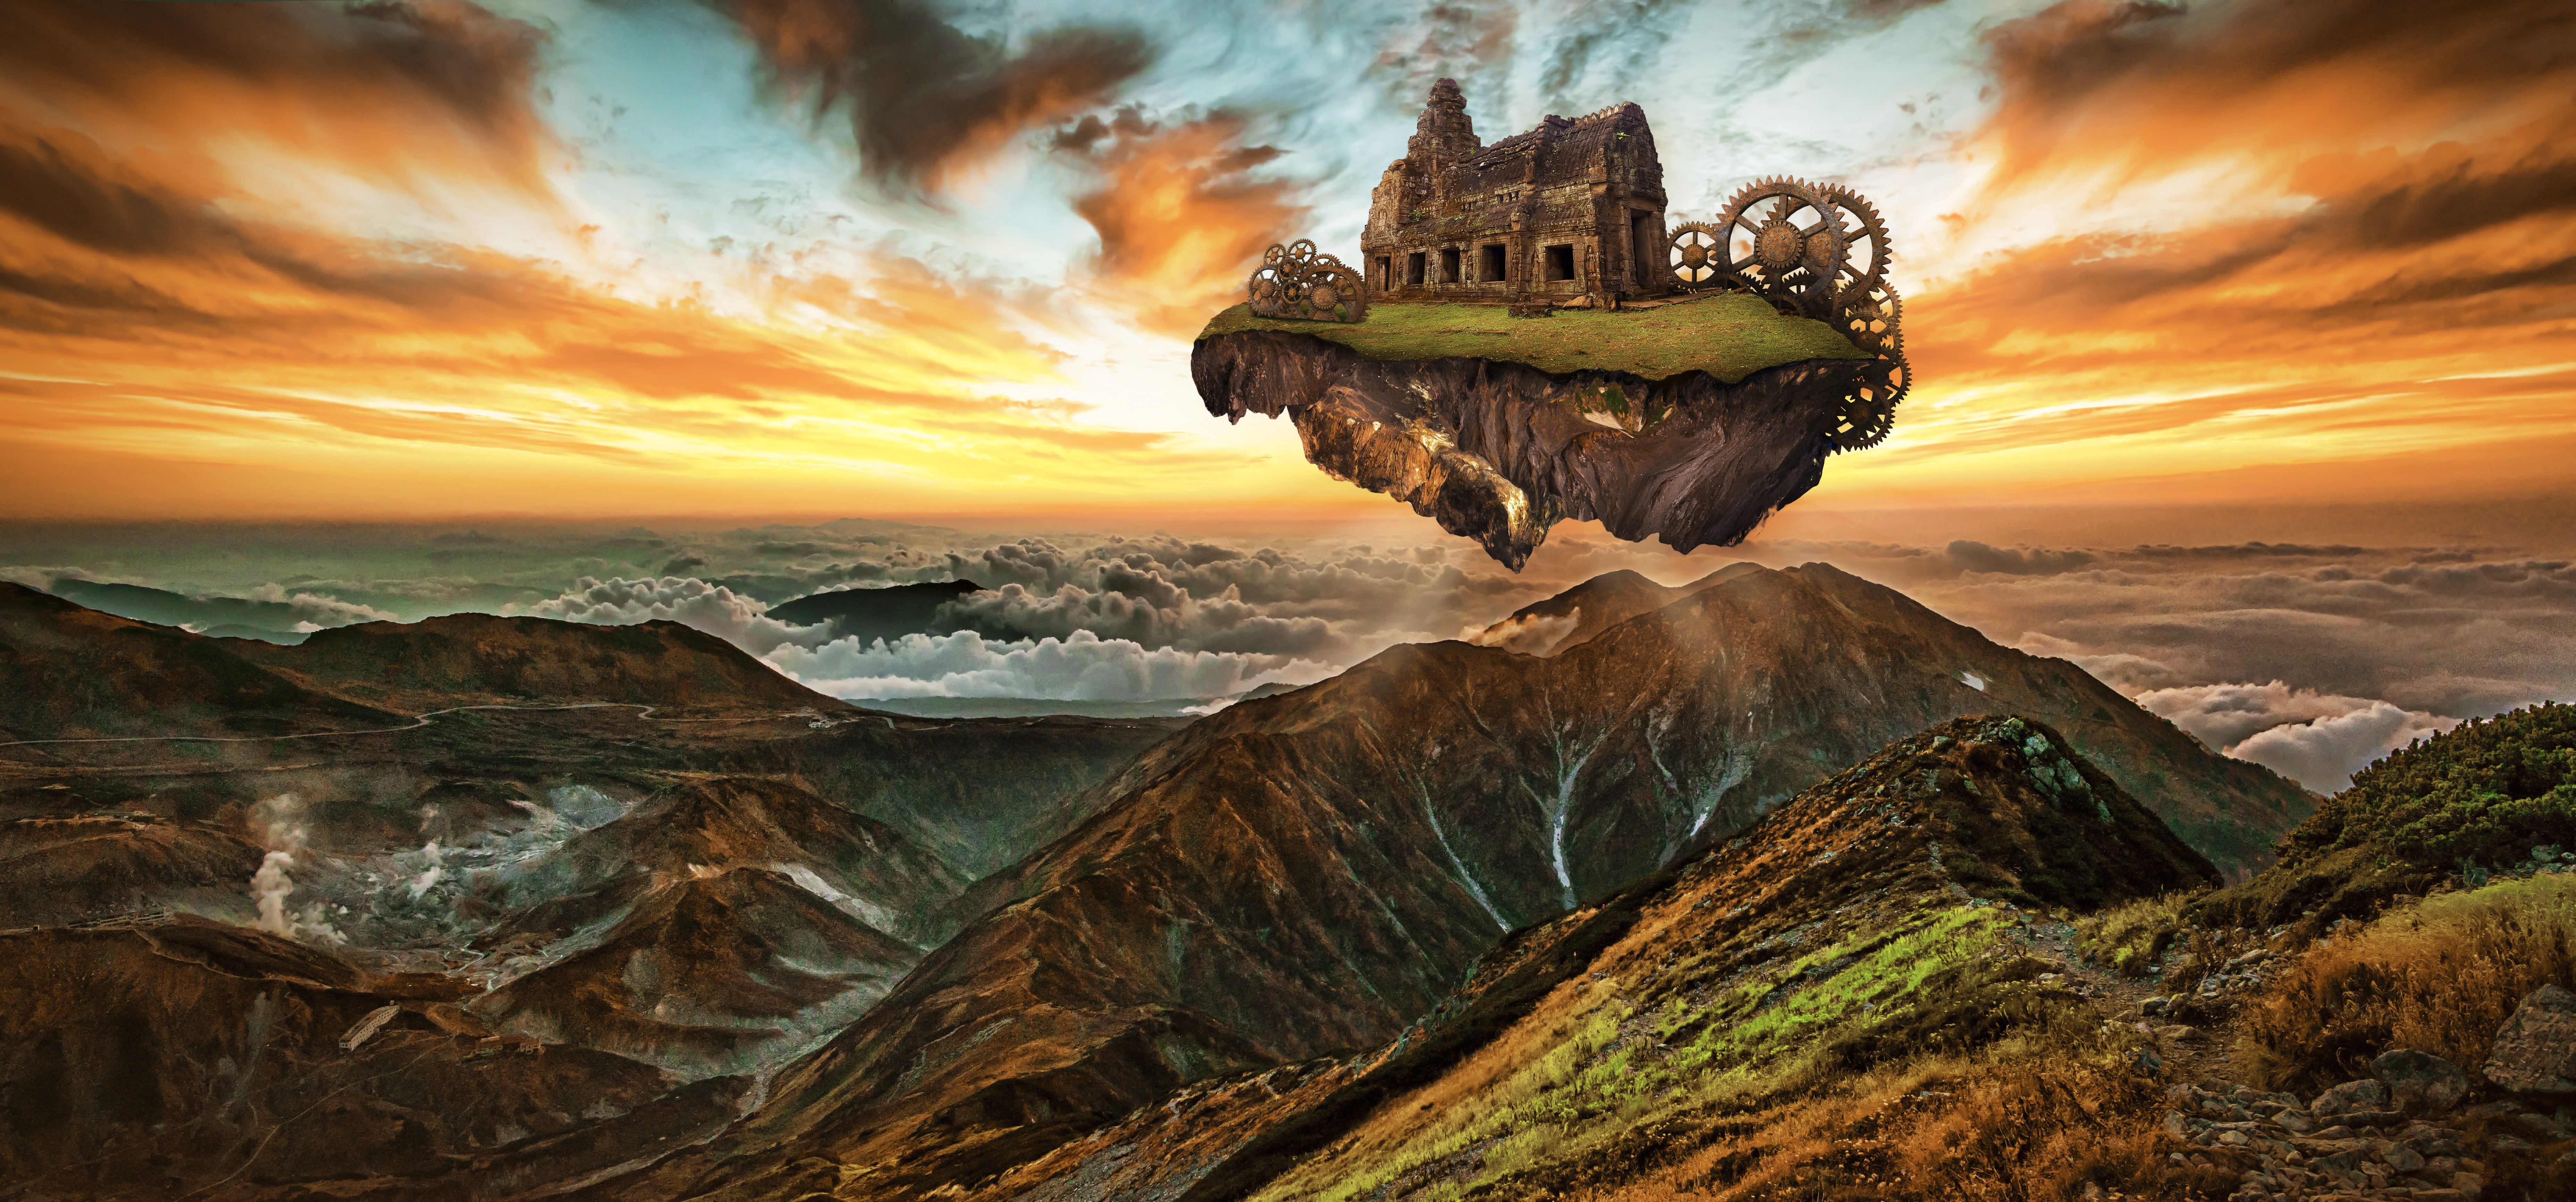 Structure mountains, fantasy, imagination, photoshop 1366x768 Wallpapers